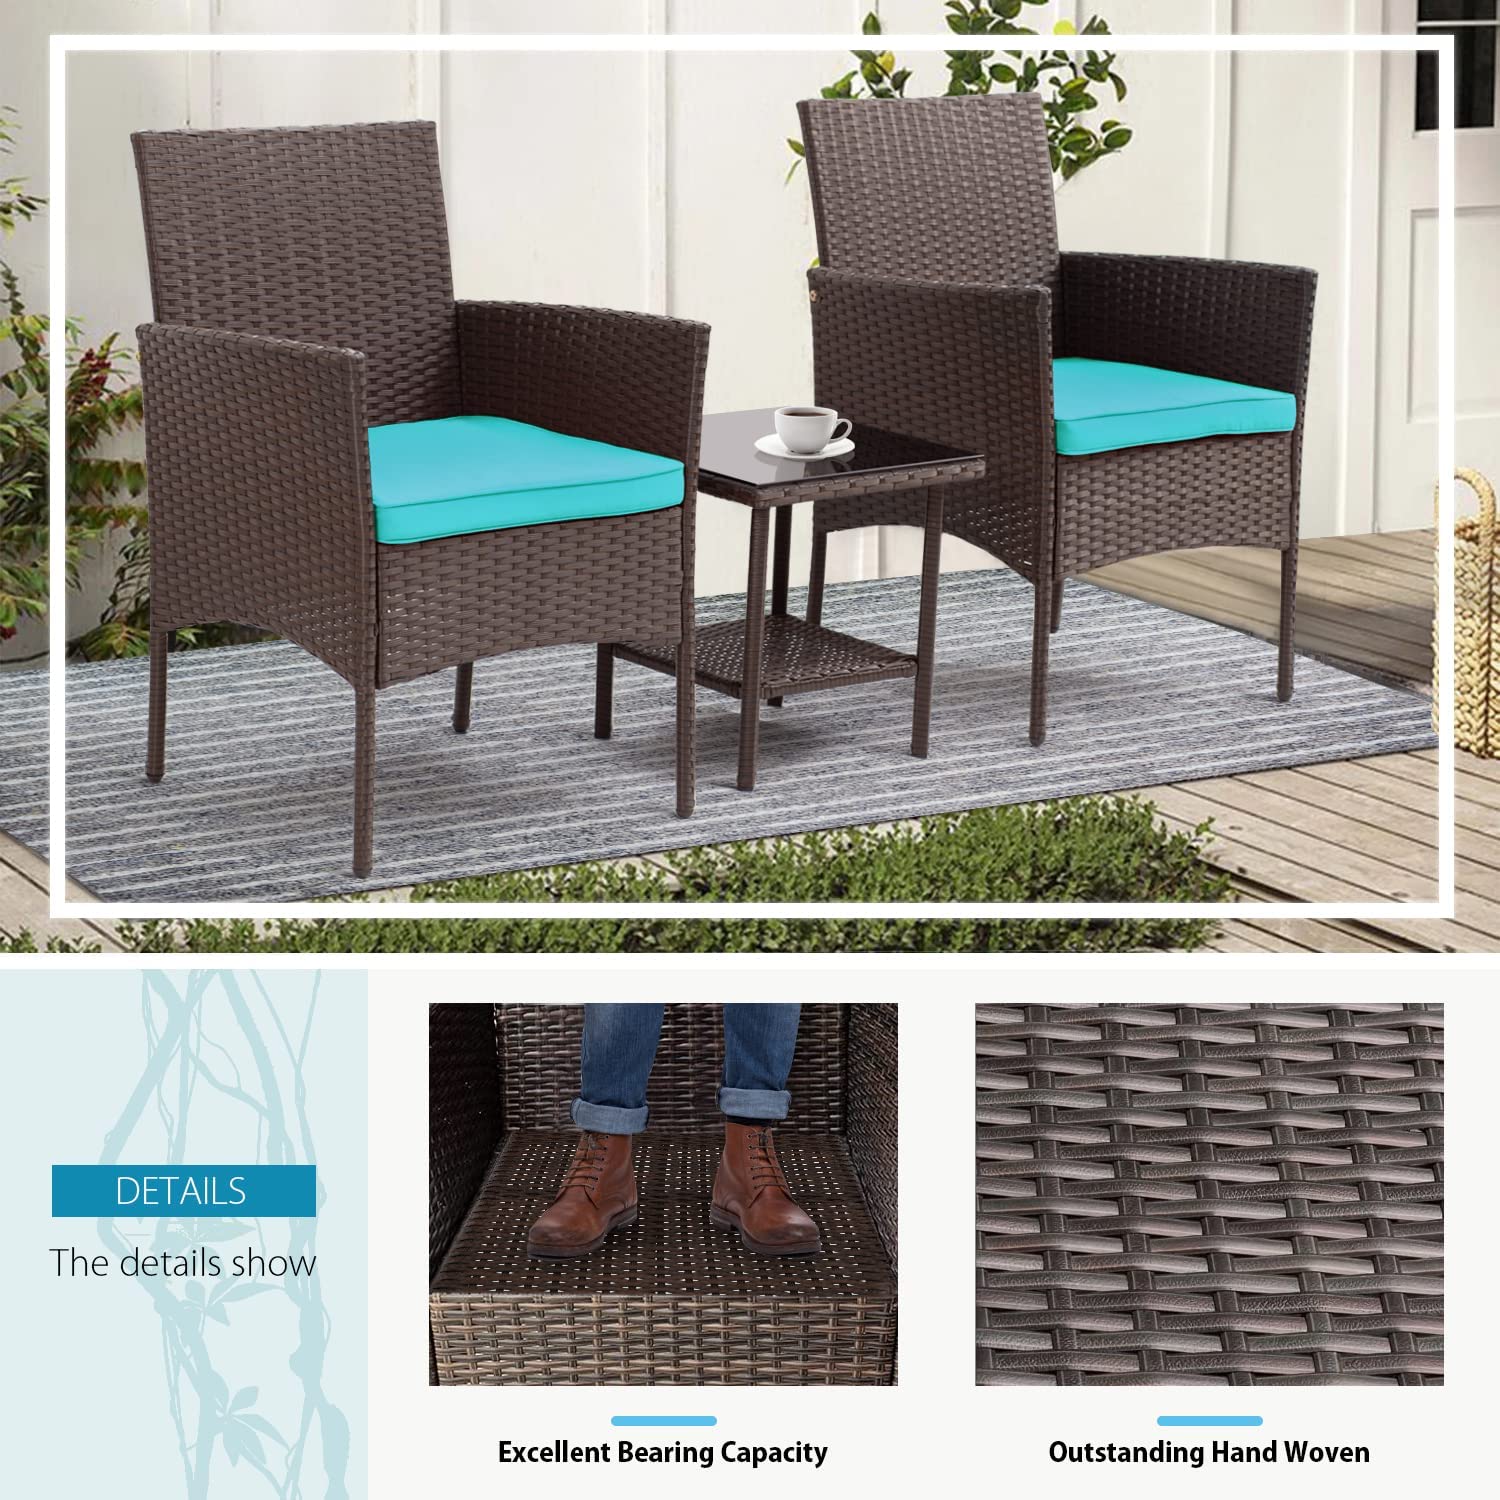 3 Piece Outdoor Furniture Set Patio Brown Wicker Chairs Furniture Bistro Conversation Set 2 Rattan Chairs with Blue Cushions and Glass Coffee Table for Porch Lawn Garden Balcony Backyard - image 3 of 7